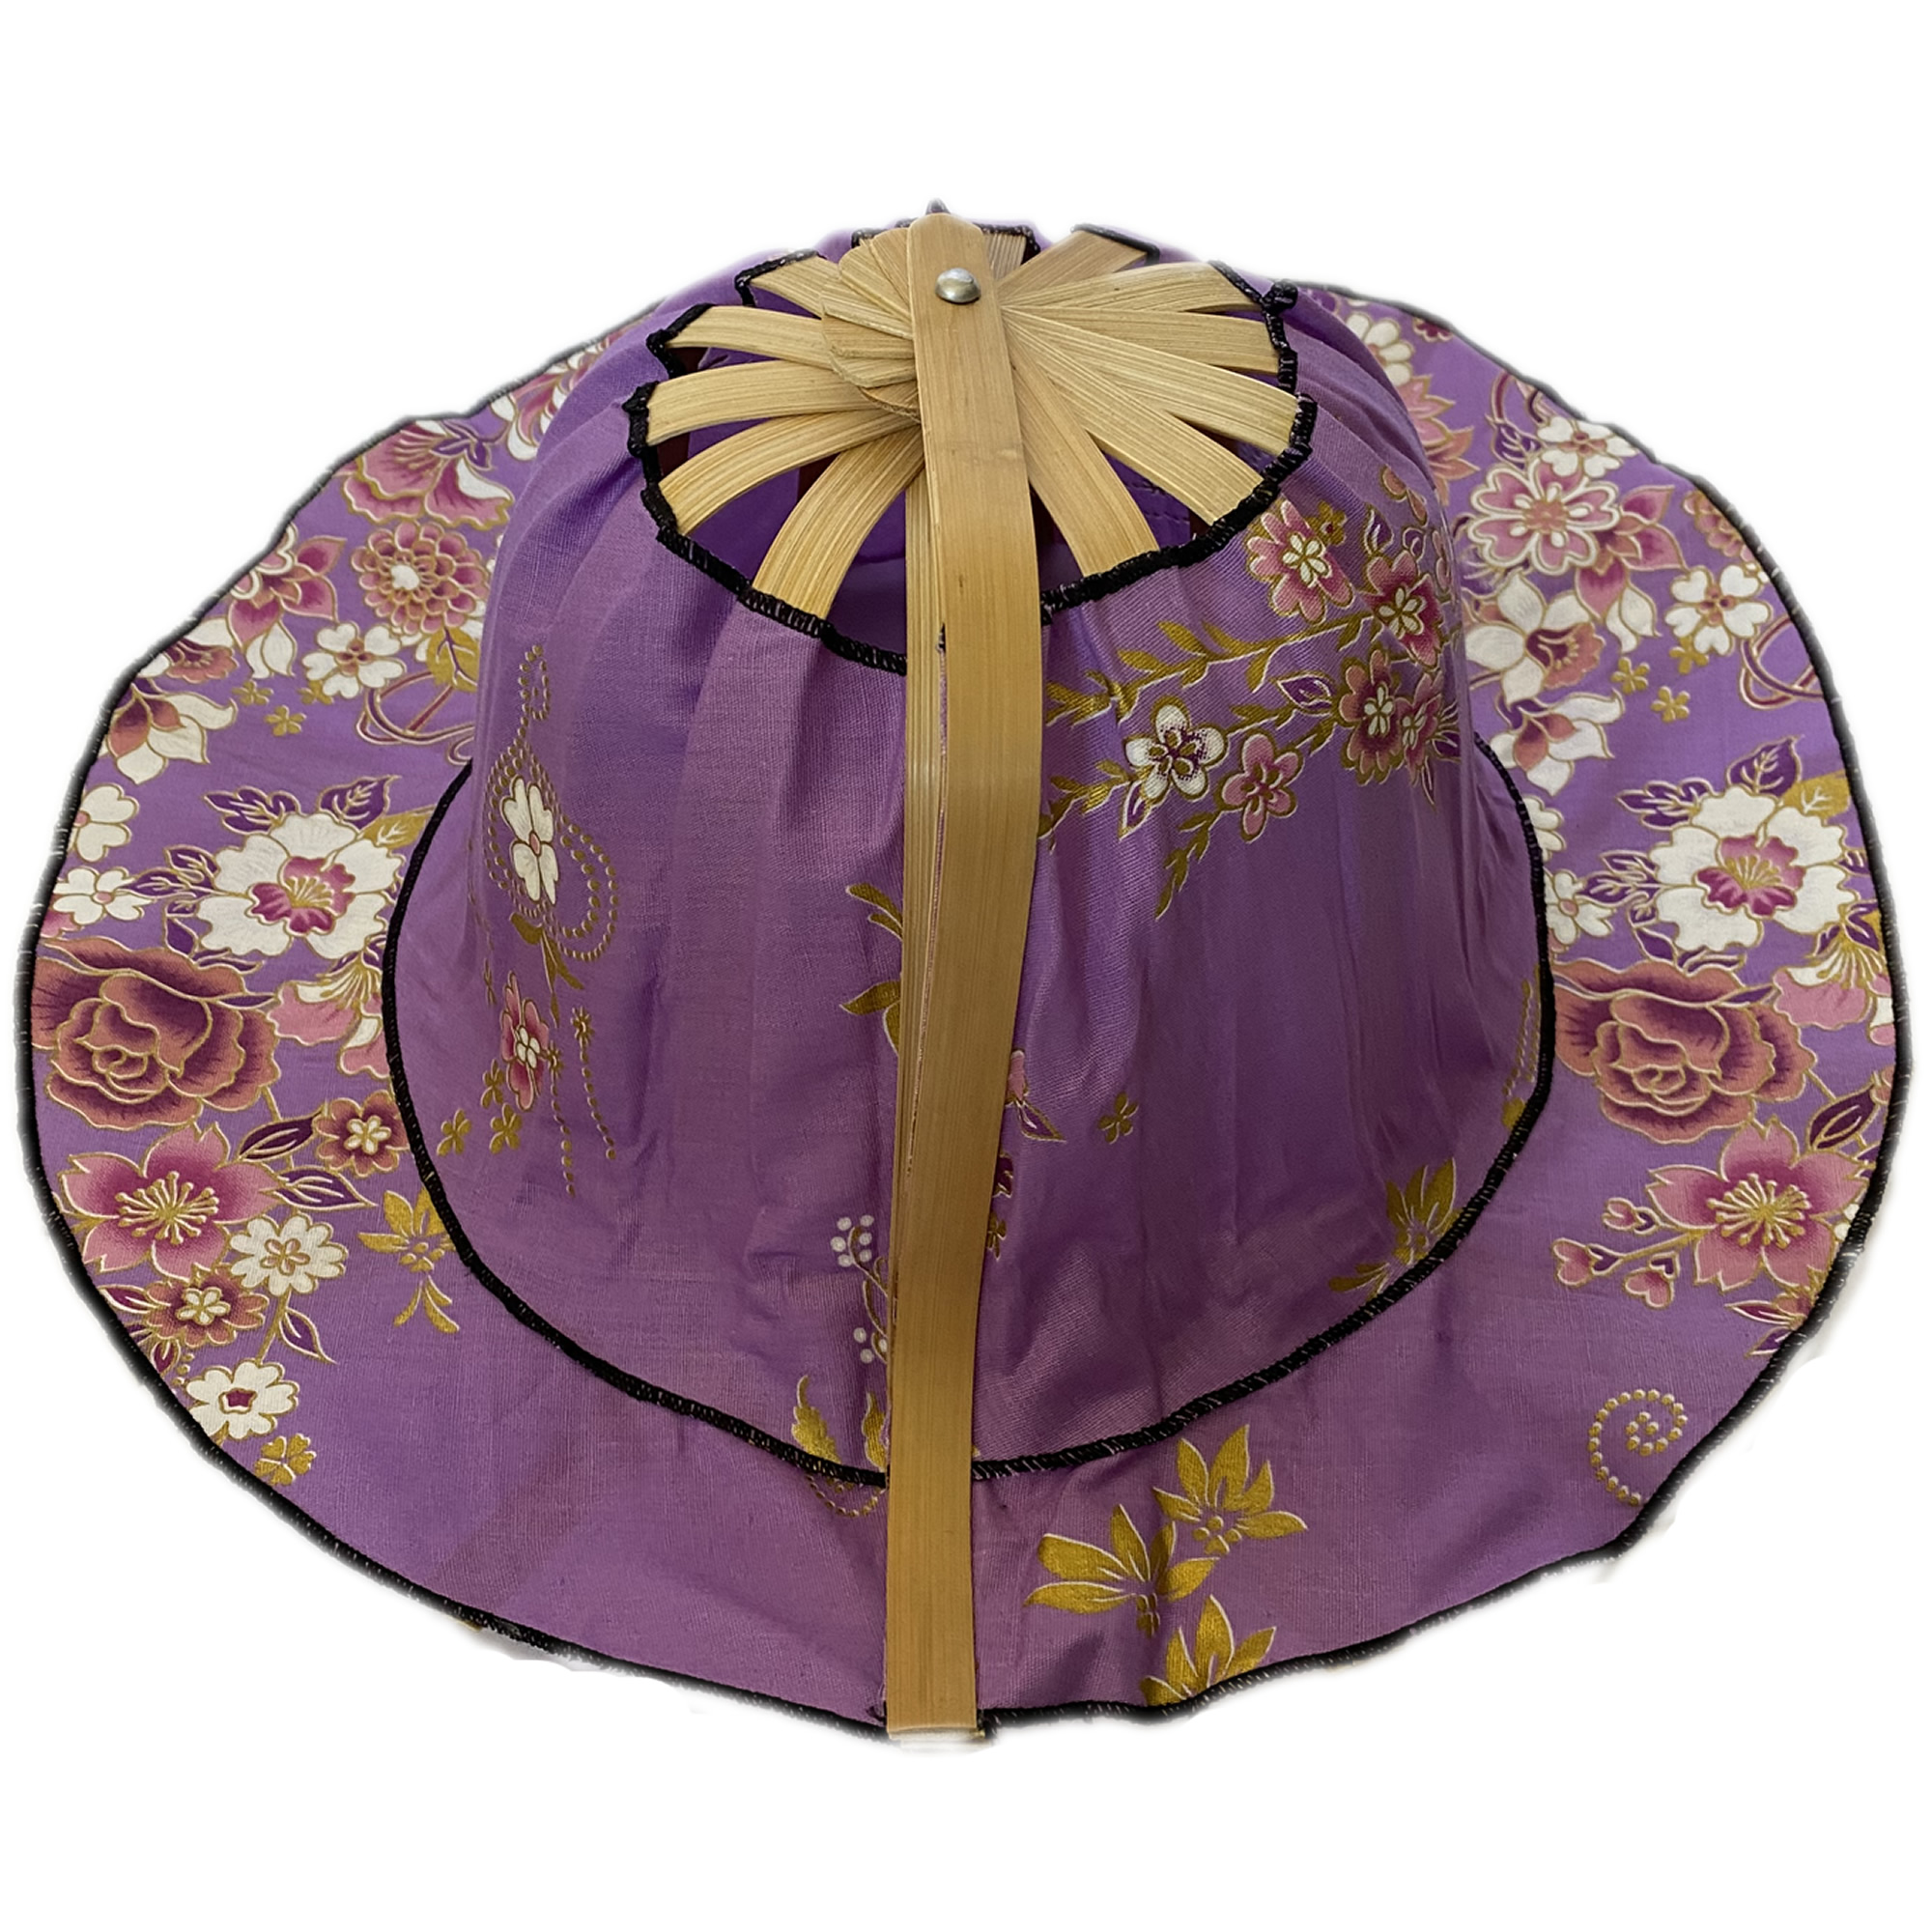 Find Wholesale bamboo foldable hat For Fashion And Protection